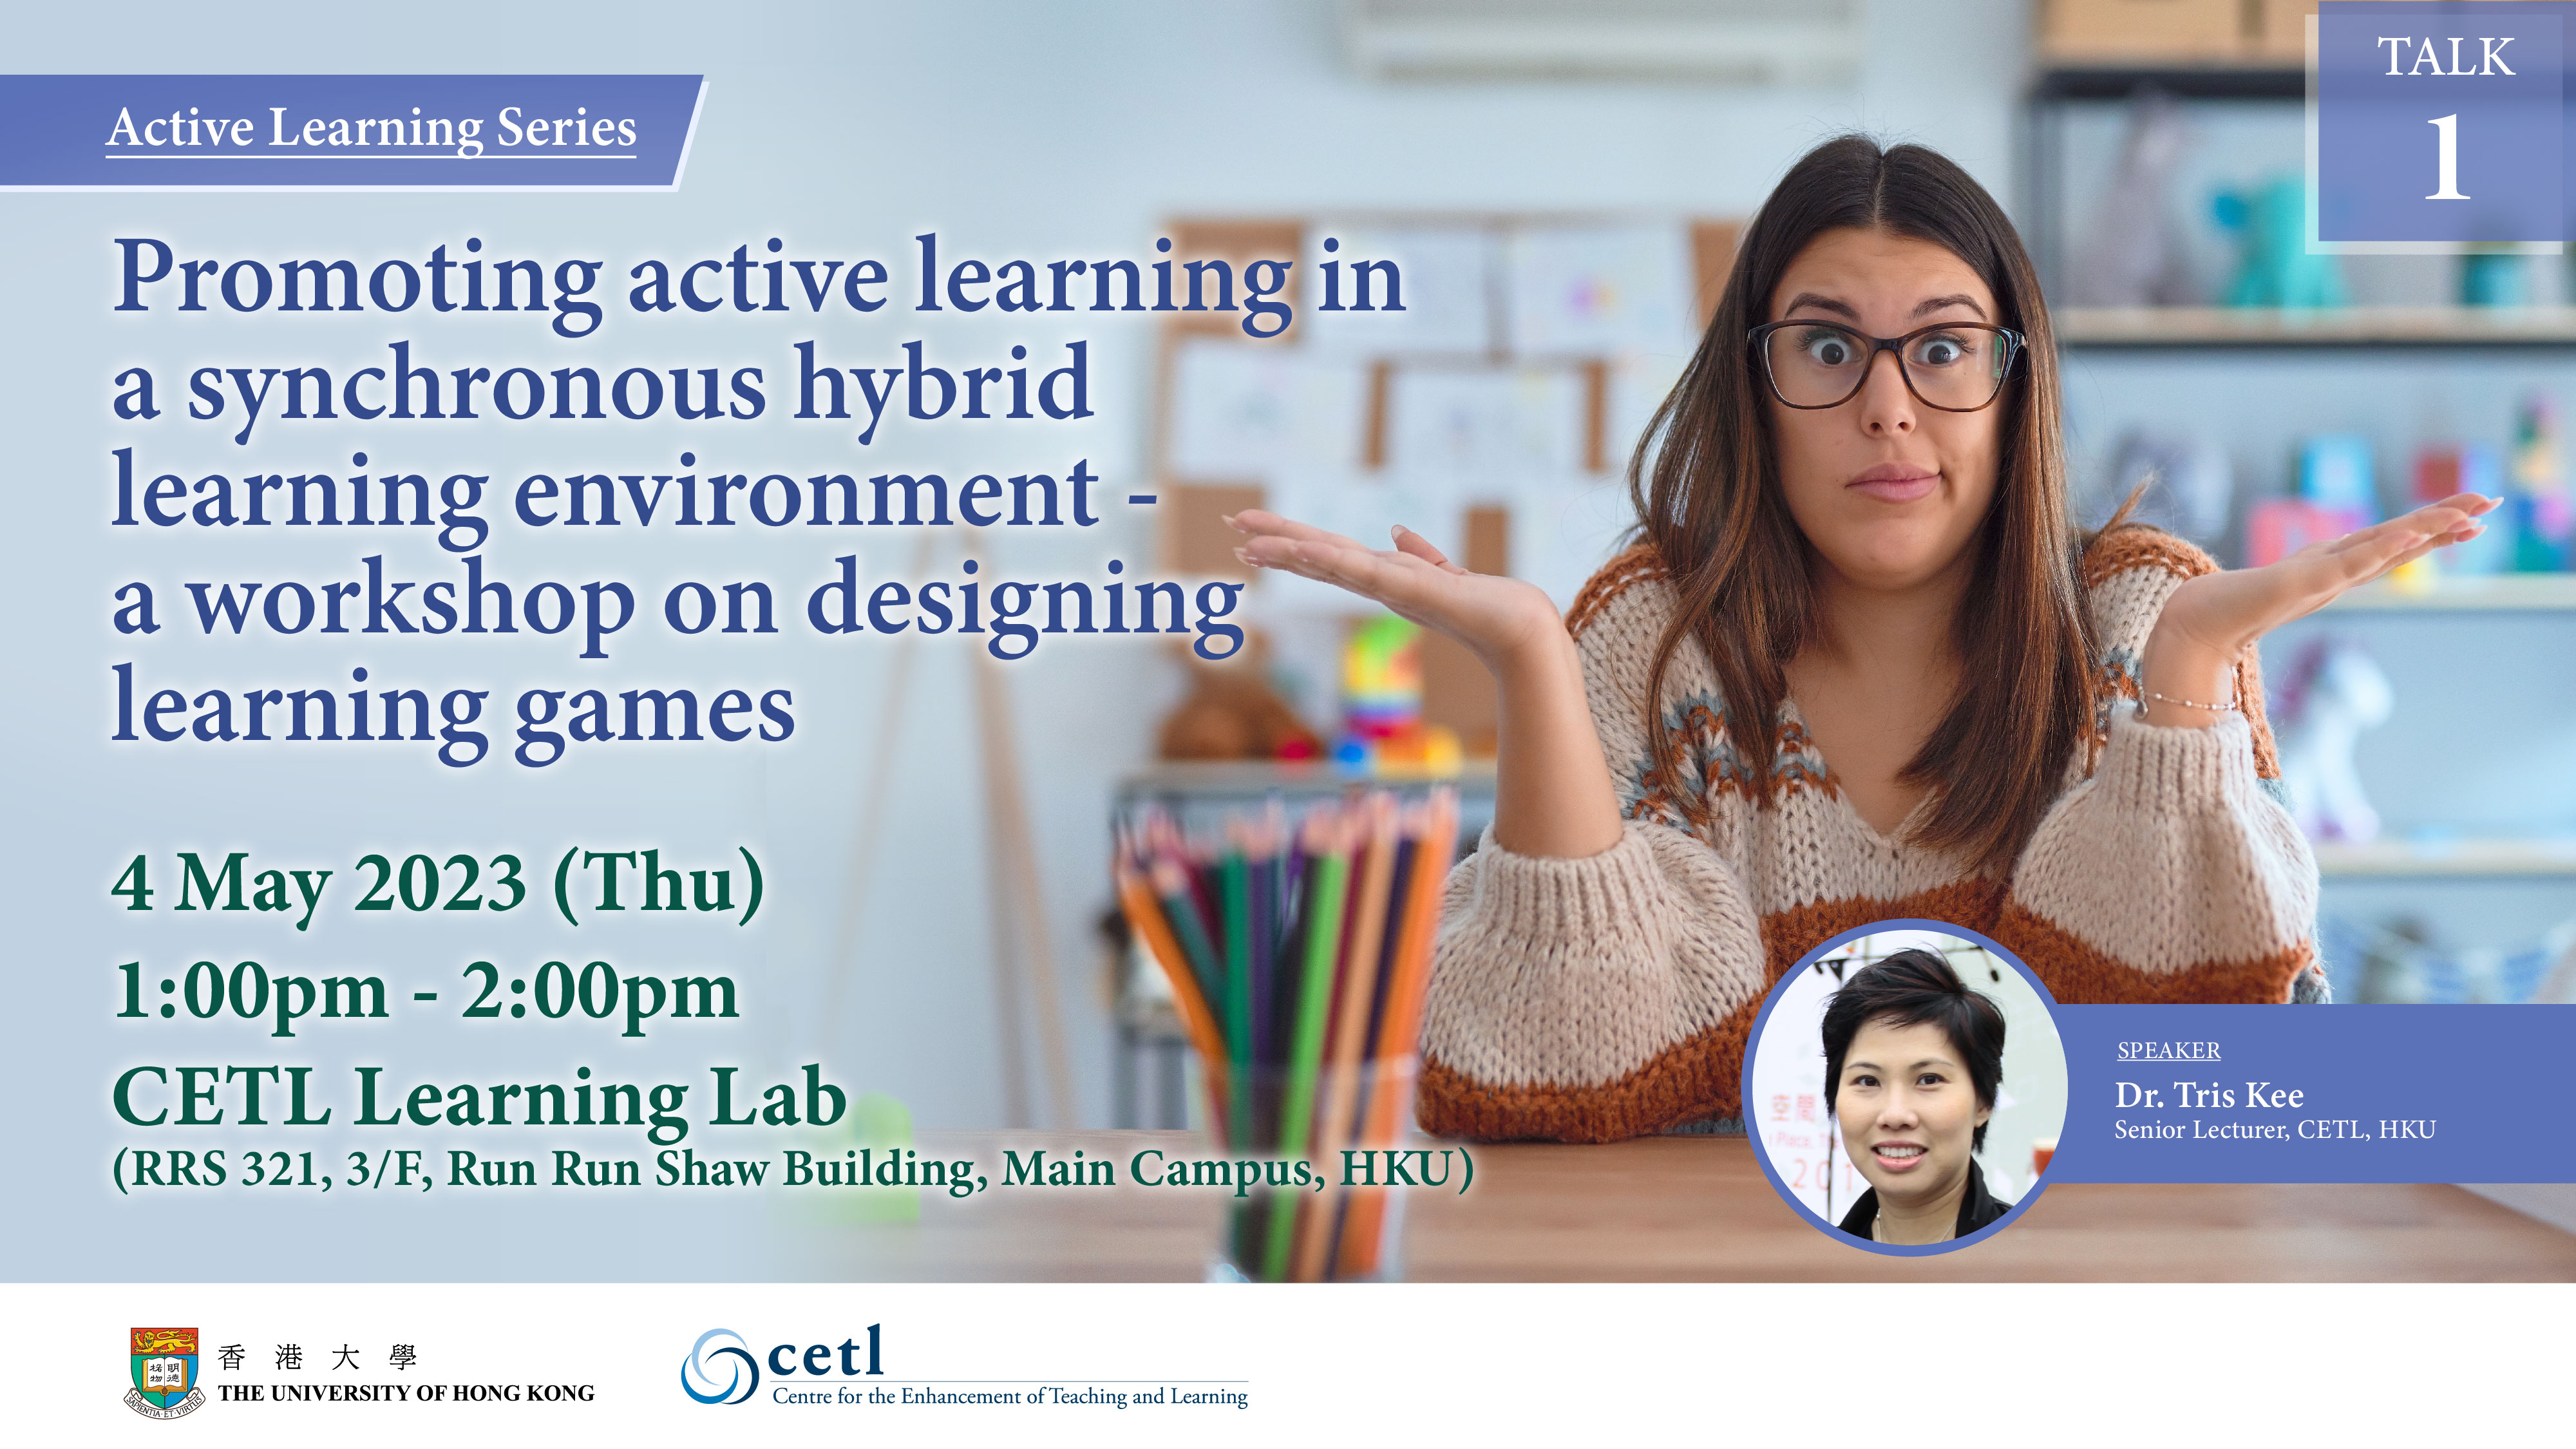 Talk 1: Promoting active learning in a synchronous hybrid learning environment - a workshop on designing learning games